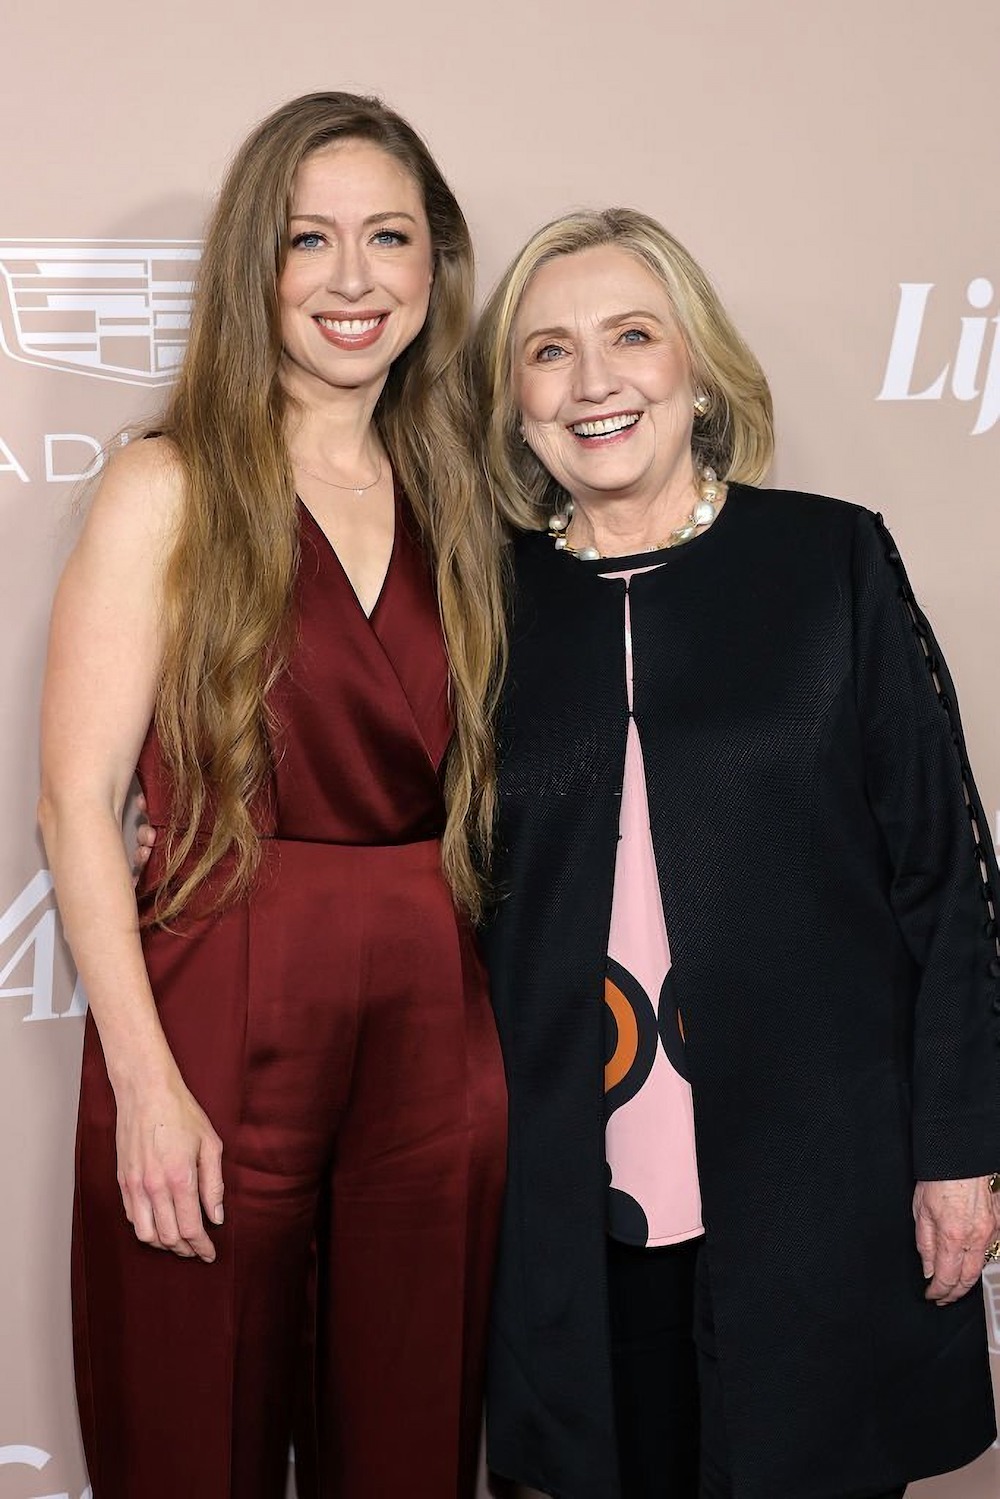 Hilary Clinton and her daughter Chelsea Clinton hit the red carpet for the&...